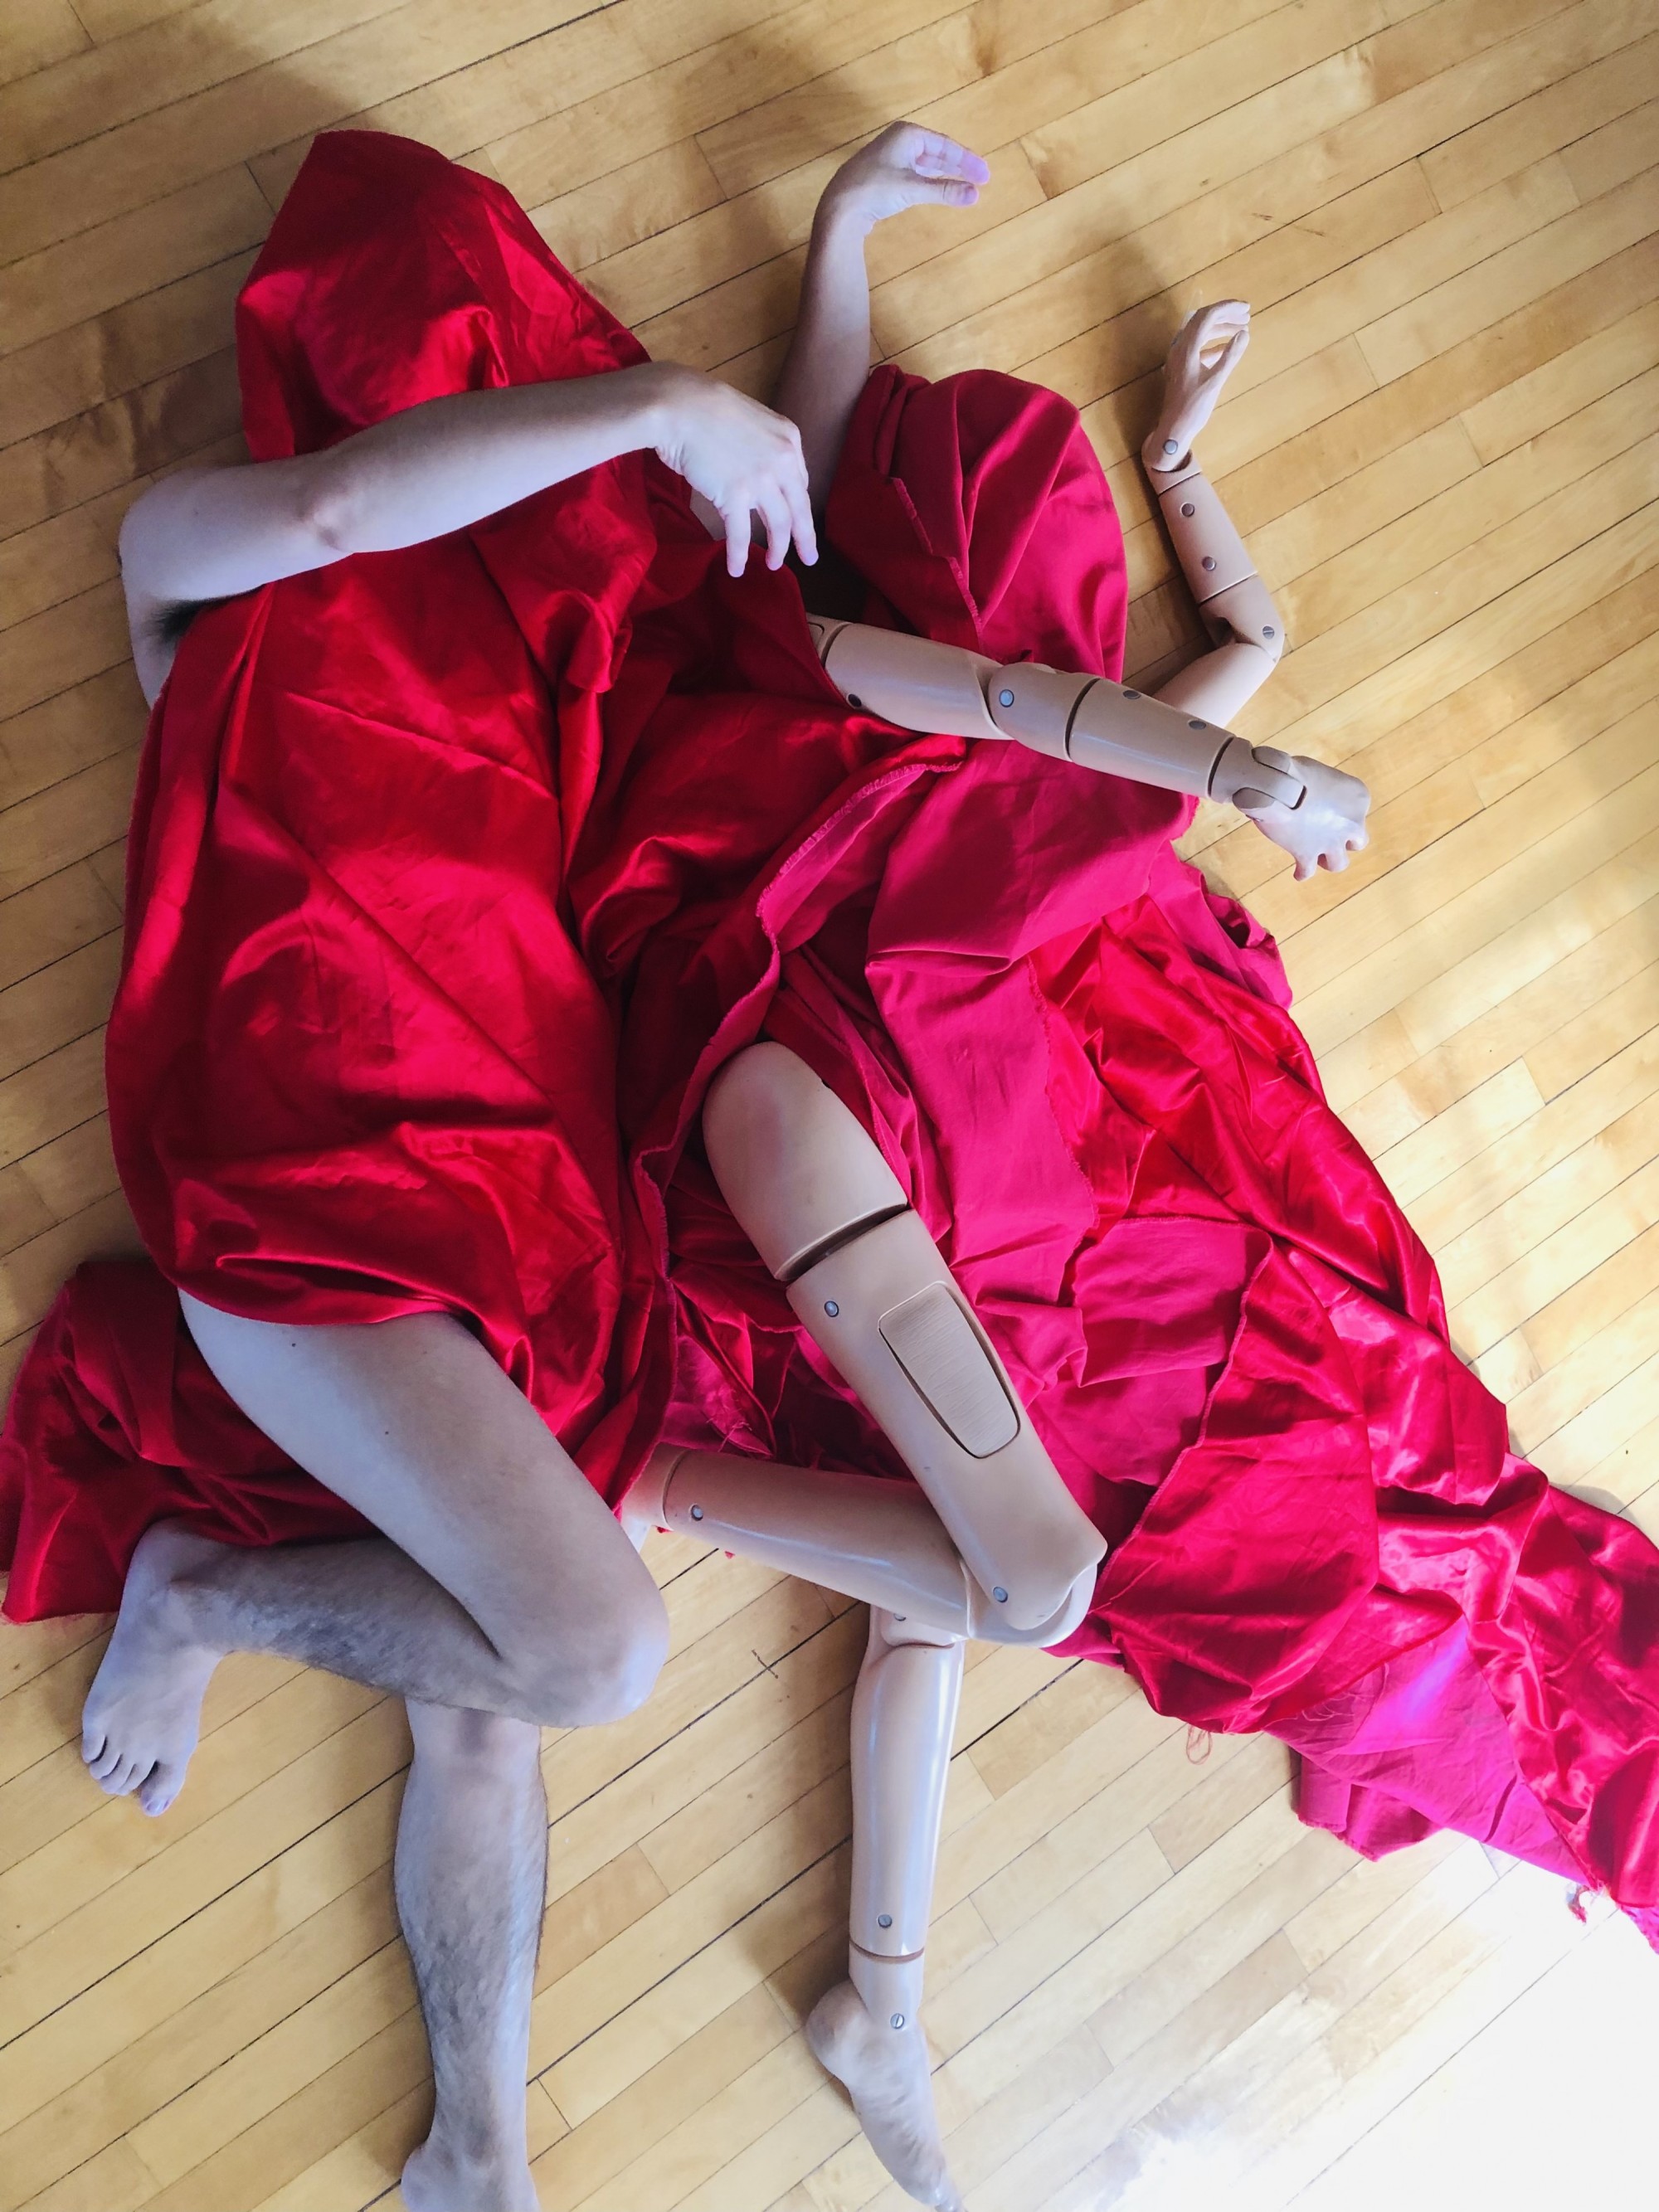 Two figures are lying on a wood floor, draped in a red blanket that covers everything but their arms and legs, which are positioned identically to each other. One figure is devynn emory, are the other is Cindy, a medical mannequin